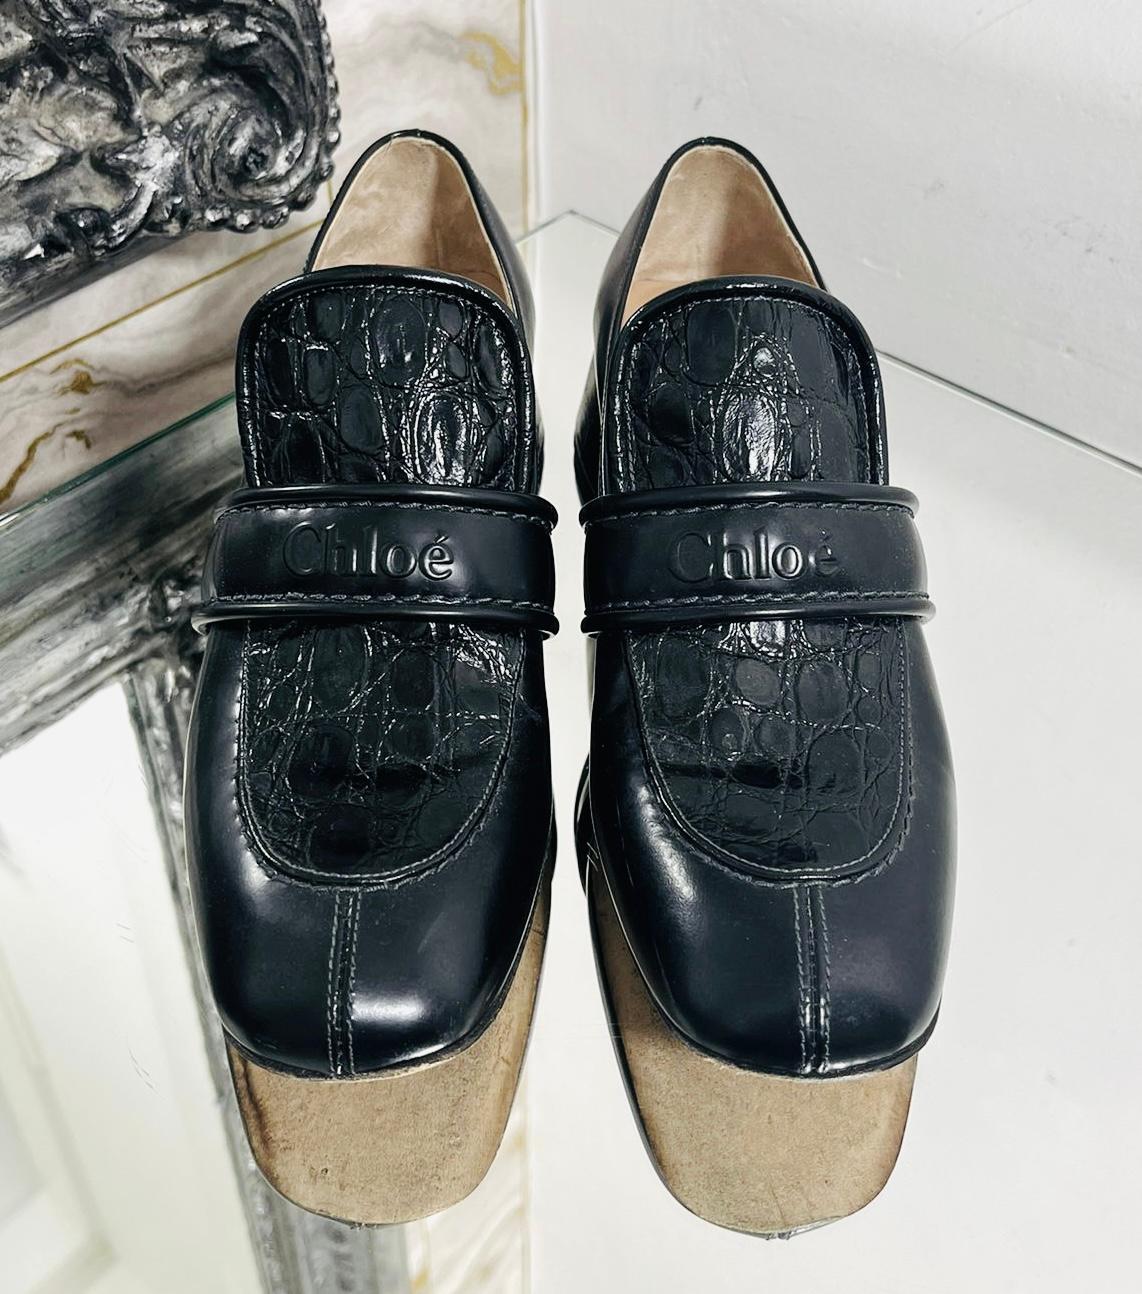 Chloe Croc Embossed Logo Leather Loafers

Black 'Cheryl' loafers designed with 'Chloe' logo embossed on the vamp straps.

Detailed with round moc toe and croc detailing to the padded tongue and short, block heel.

Featuring beige suede lining and